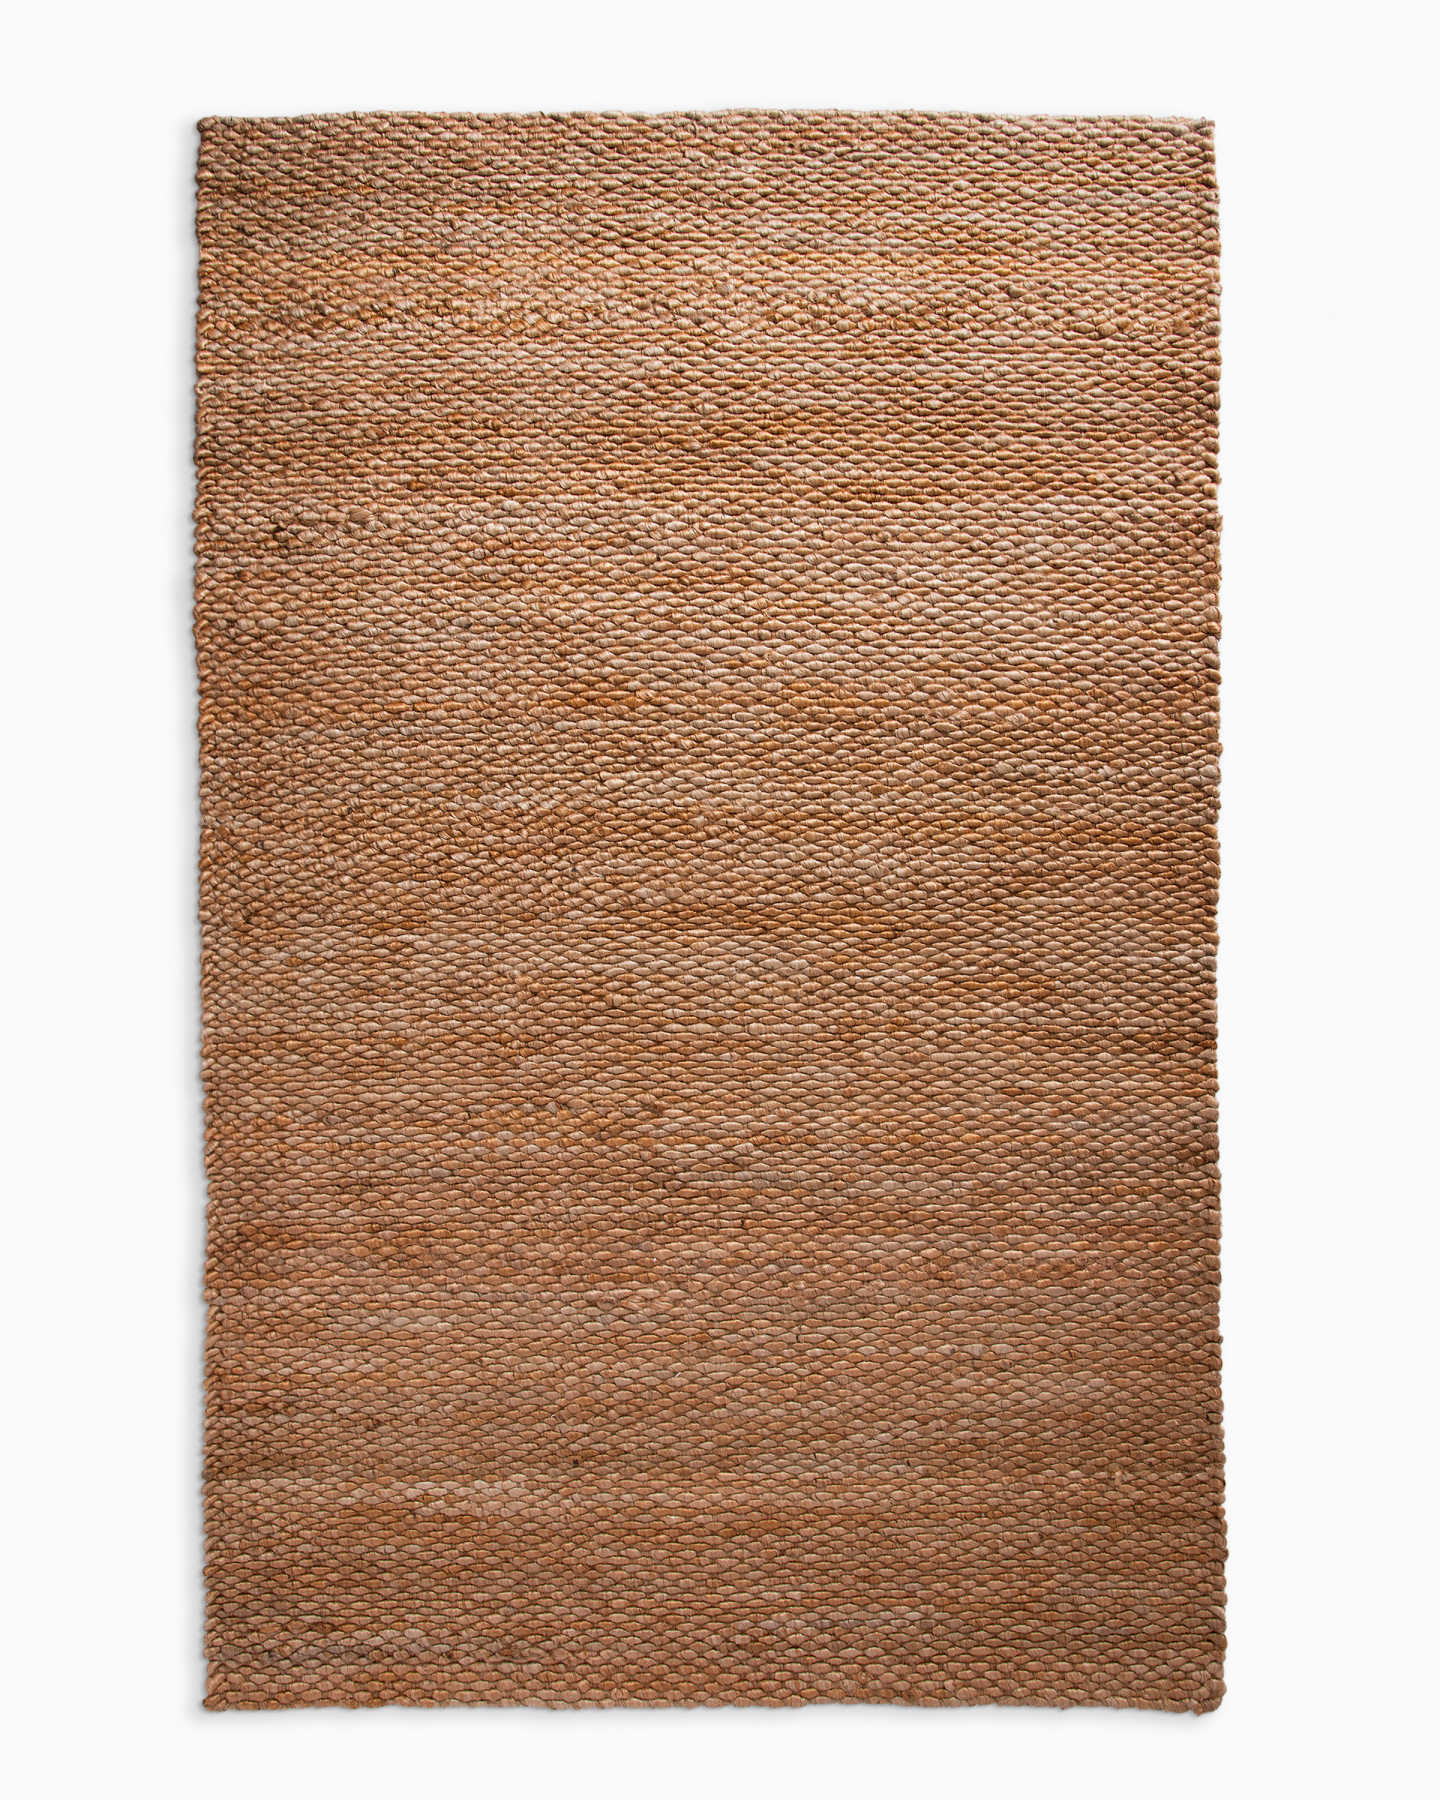 Heather Jute Coil Rug - Natural